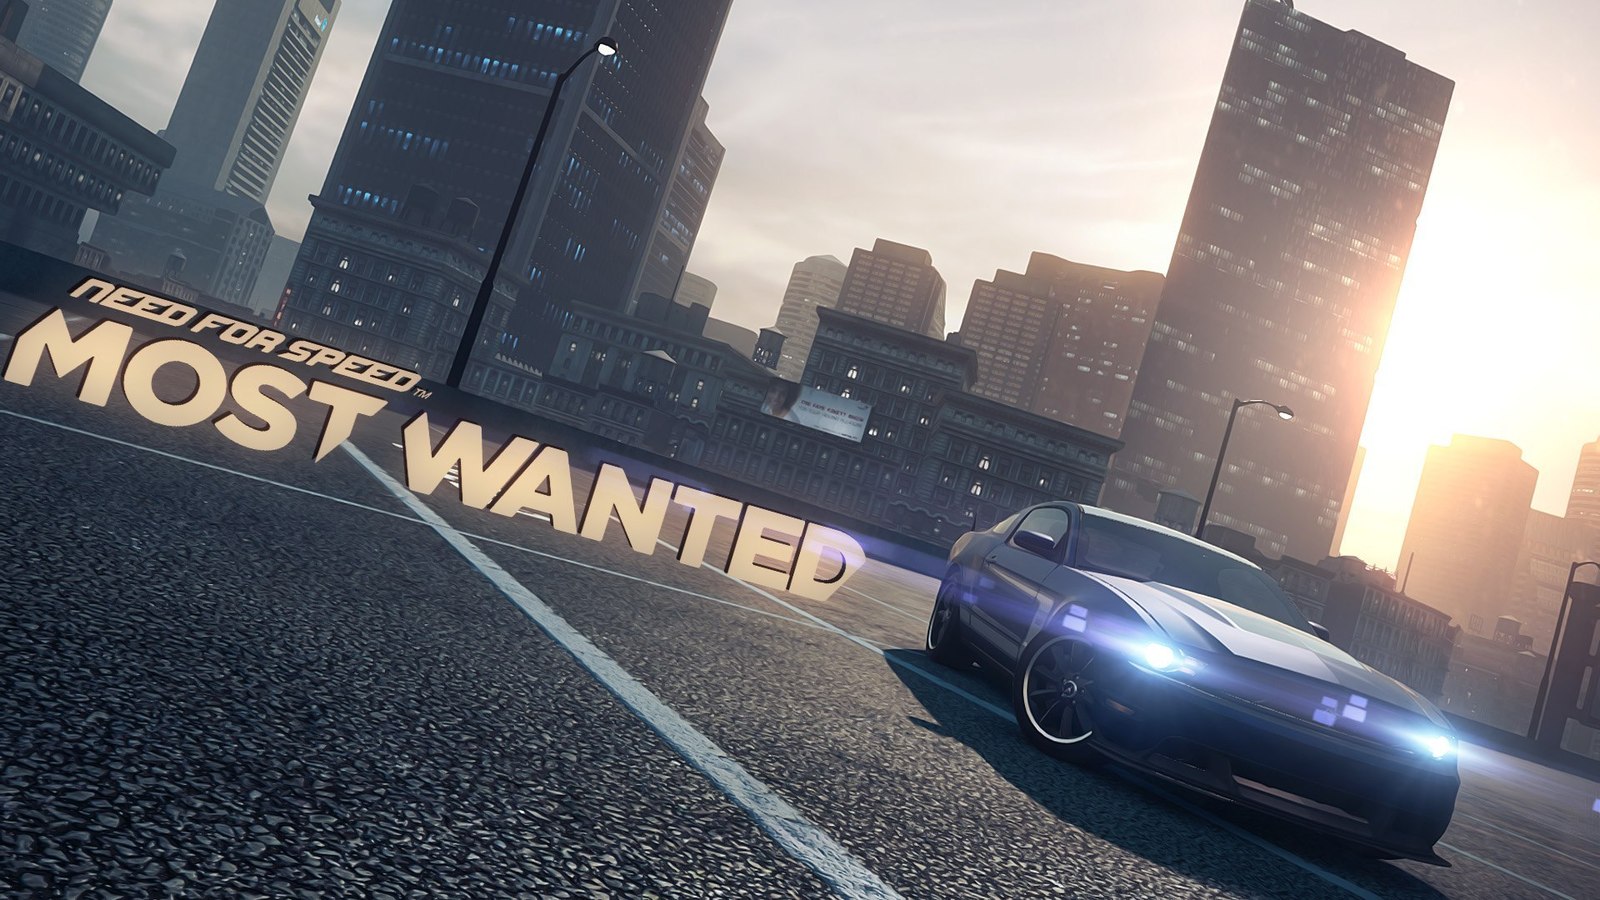 Спид мост вантед 2. Need for Speed most wanted 2. NFS most wanted 2012 Постер. NFS MW 2012 обложка. Галерея need for Speed: most wanted 2012.